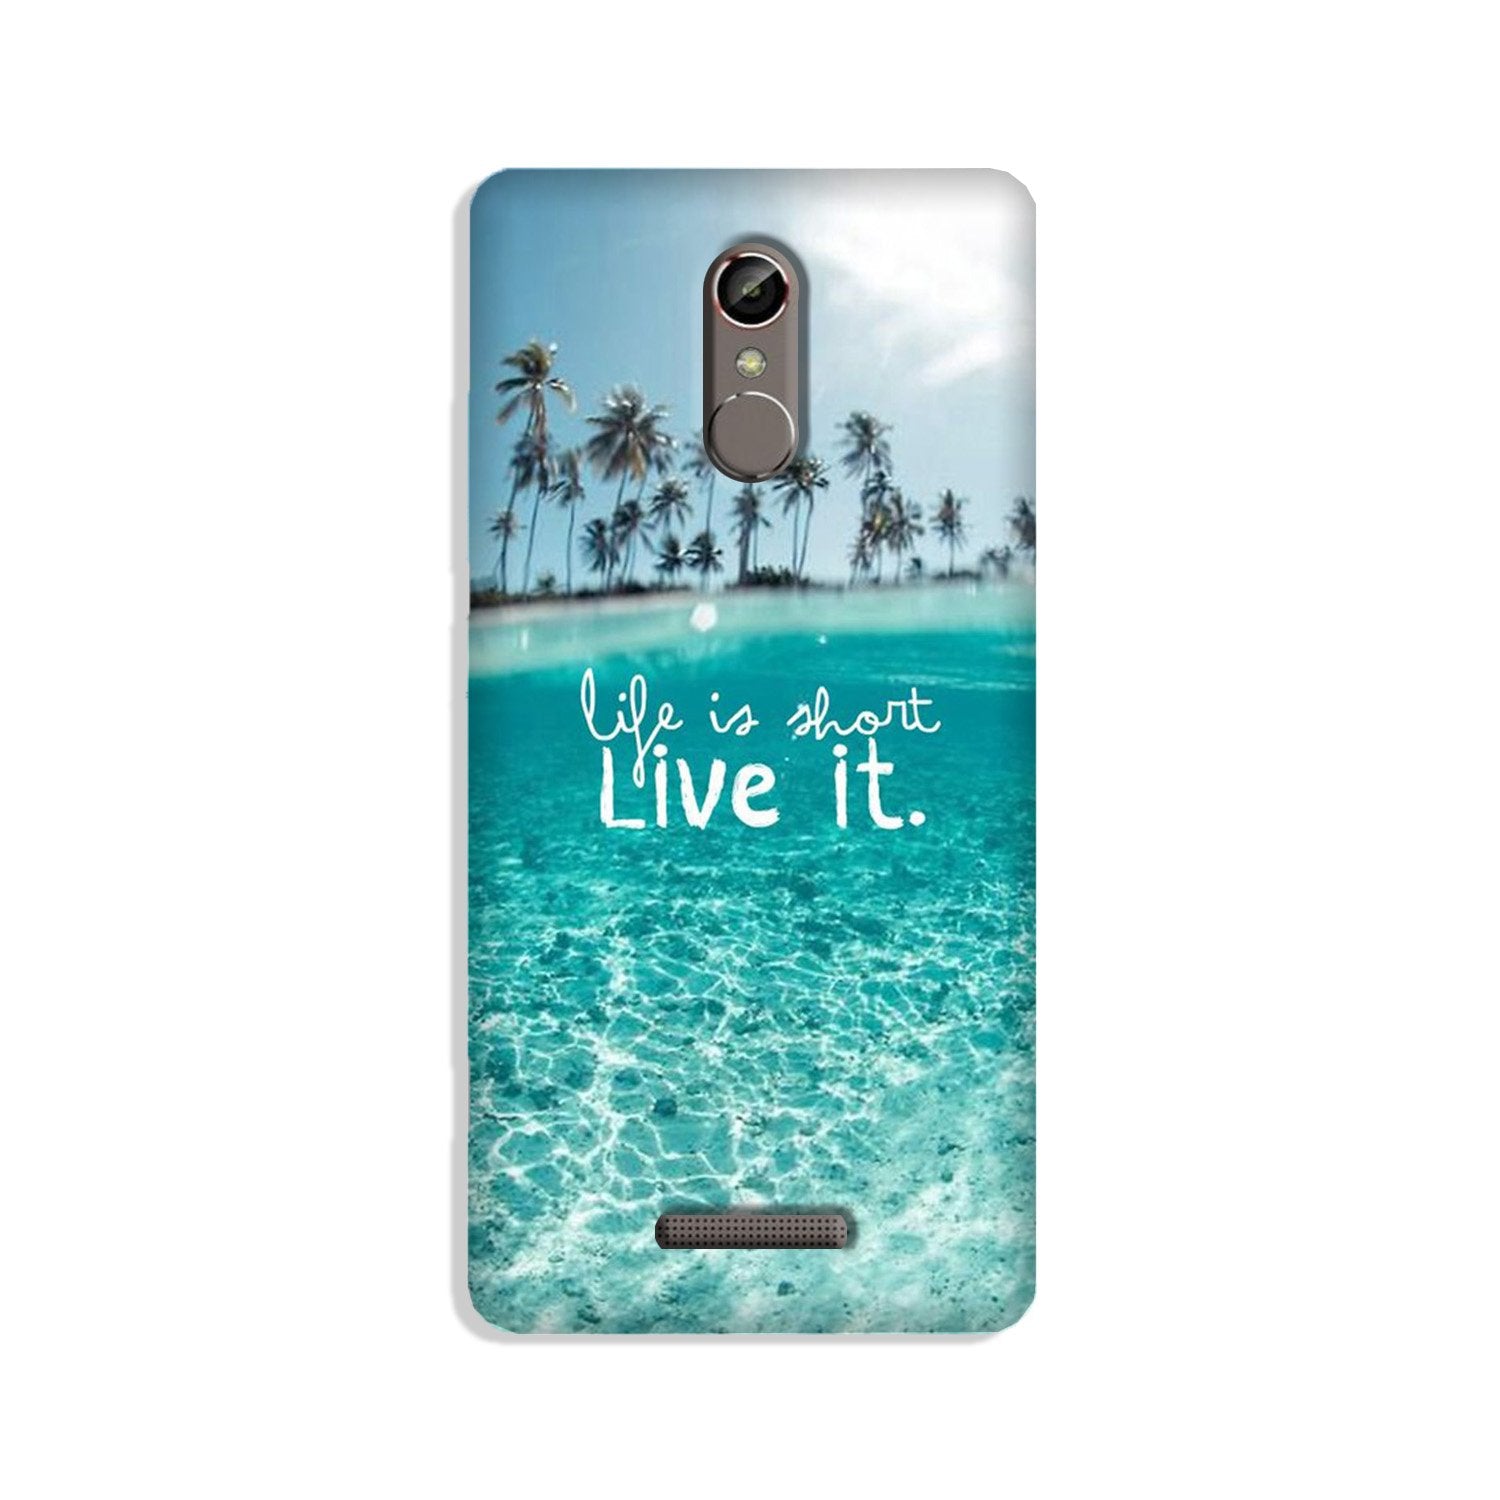 Life is short live it Case for Redmi Note 3